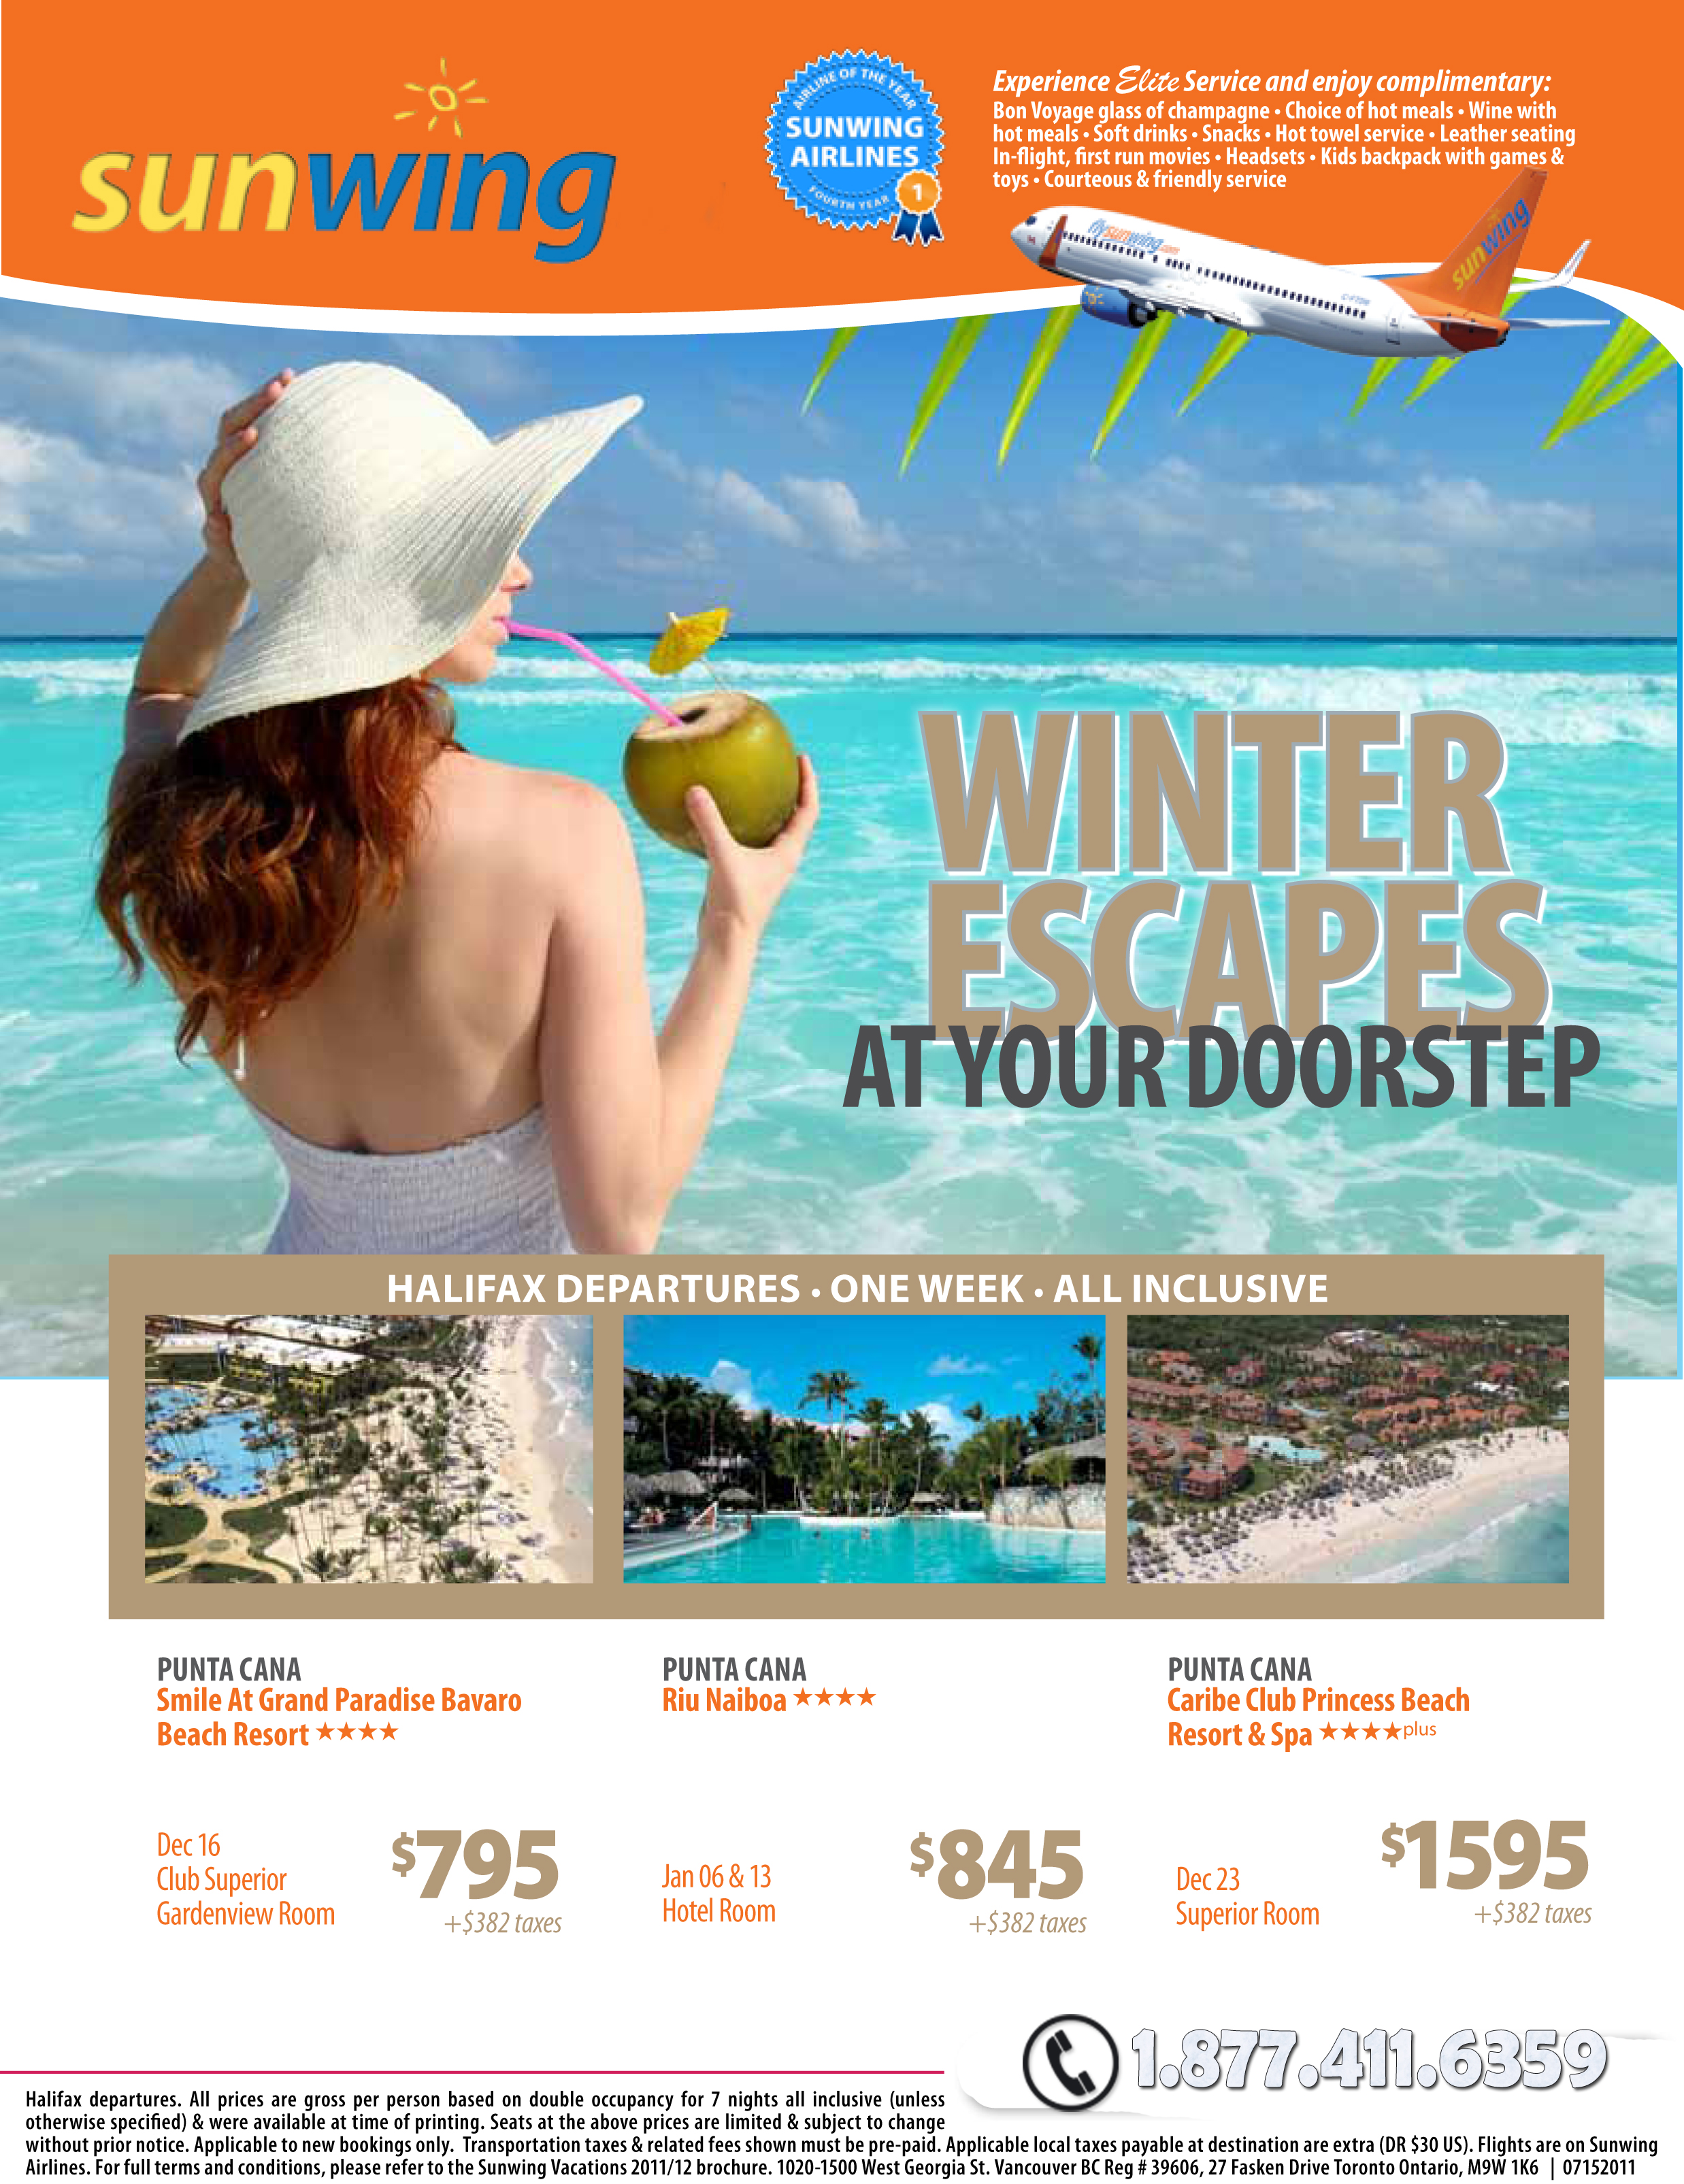 Sunwing Vacations | Winter Escapes with Sunwing Vacations | Winter